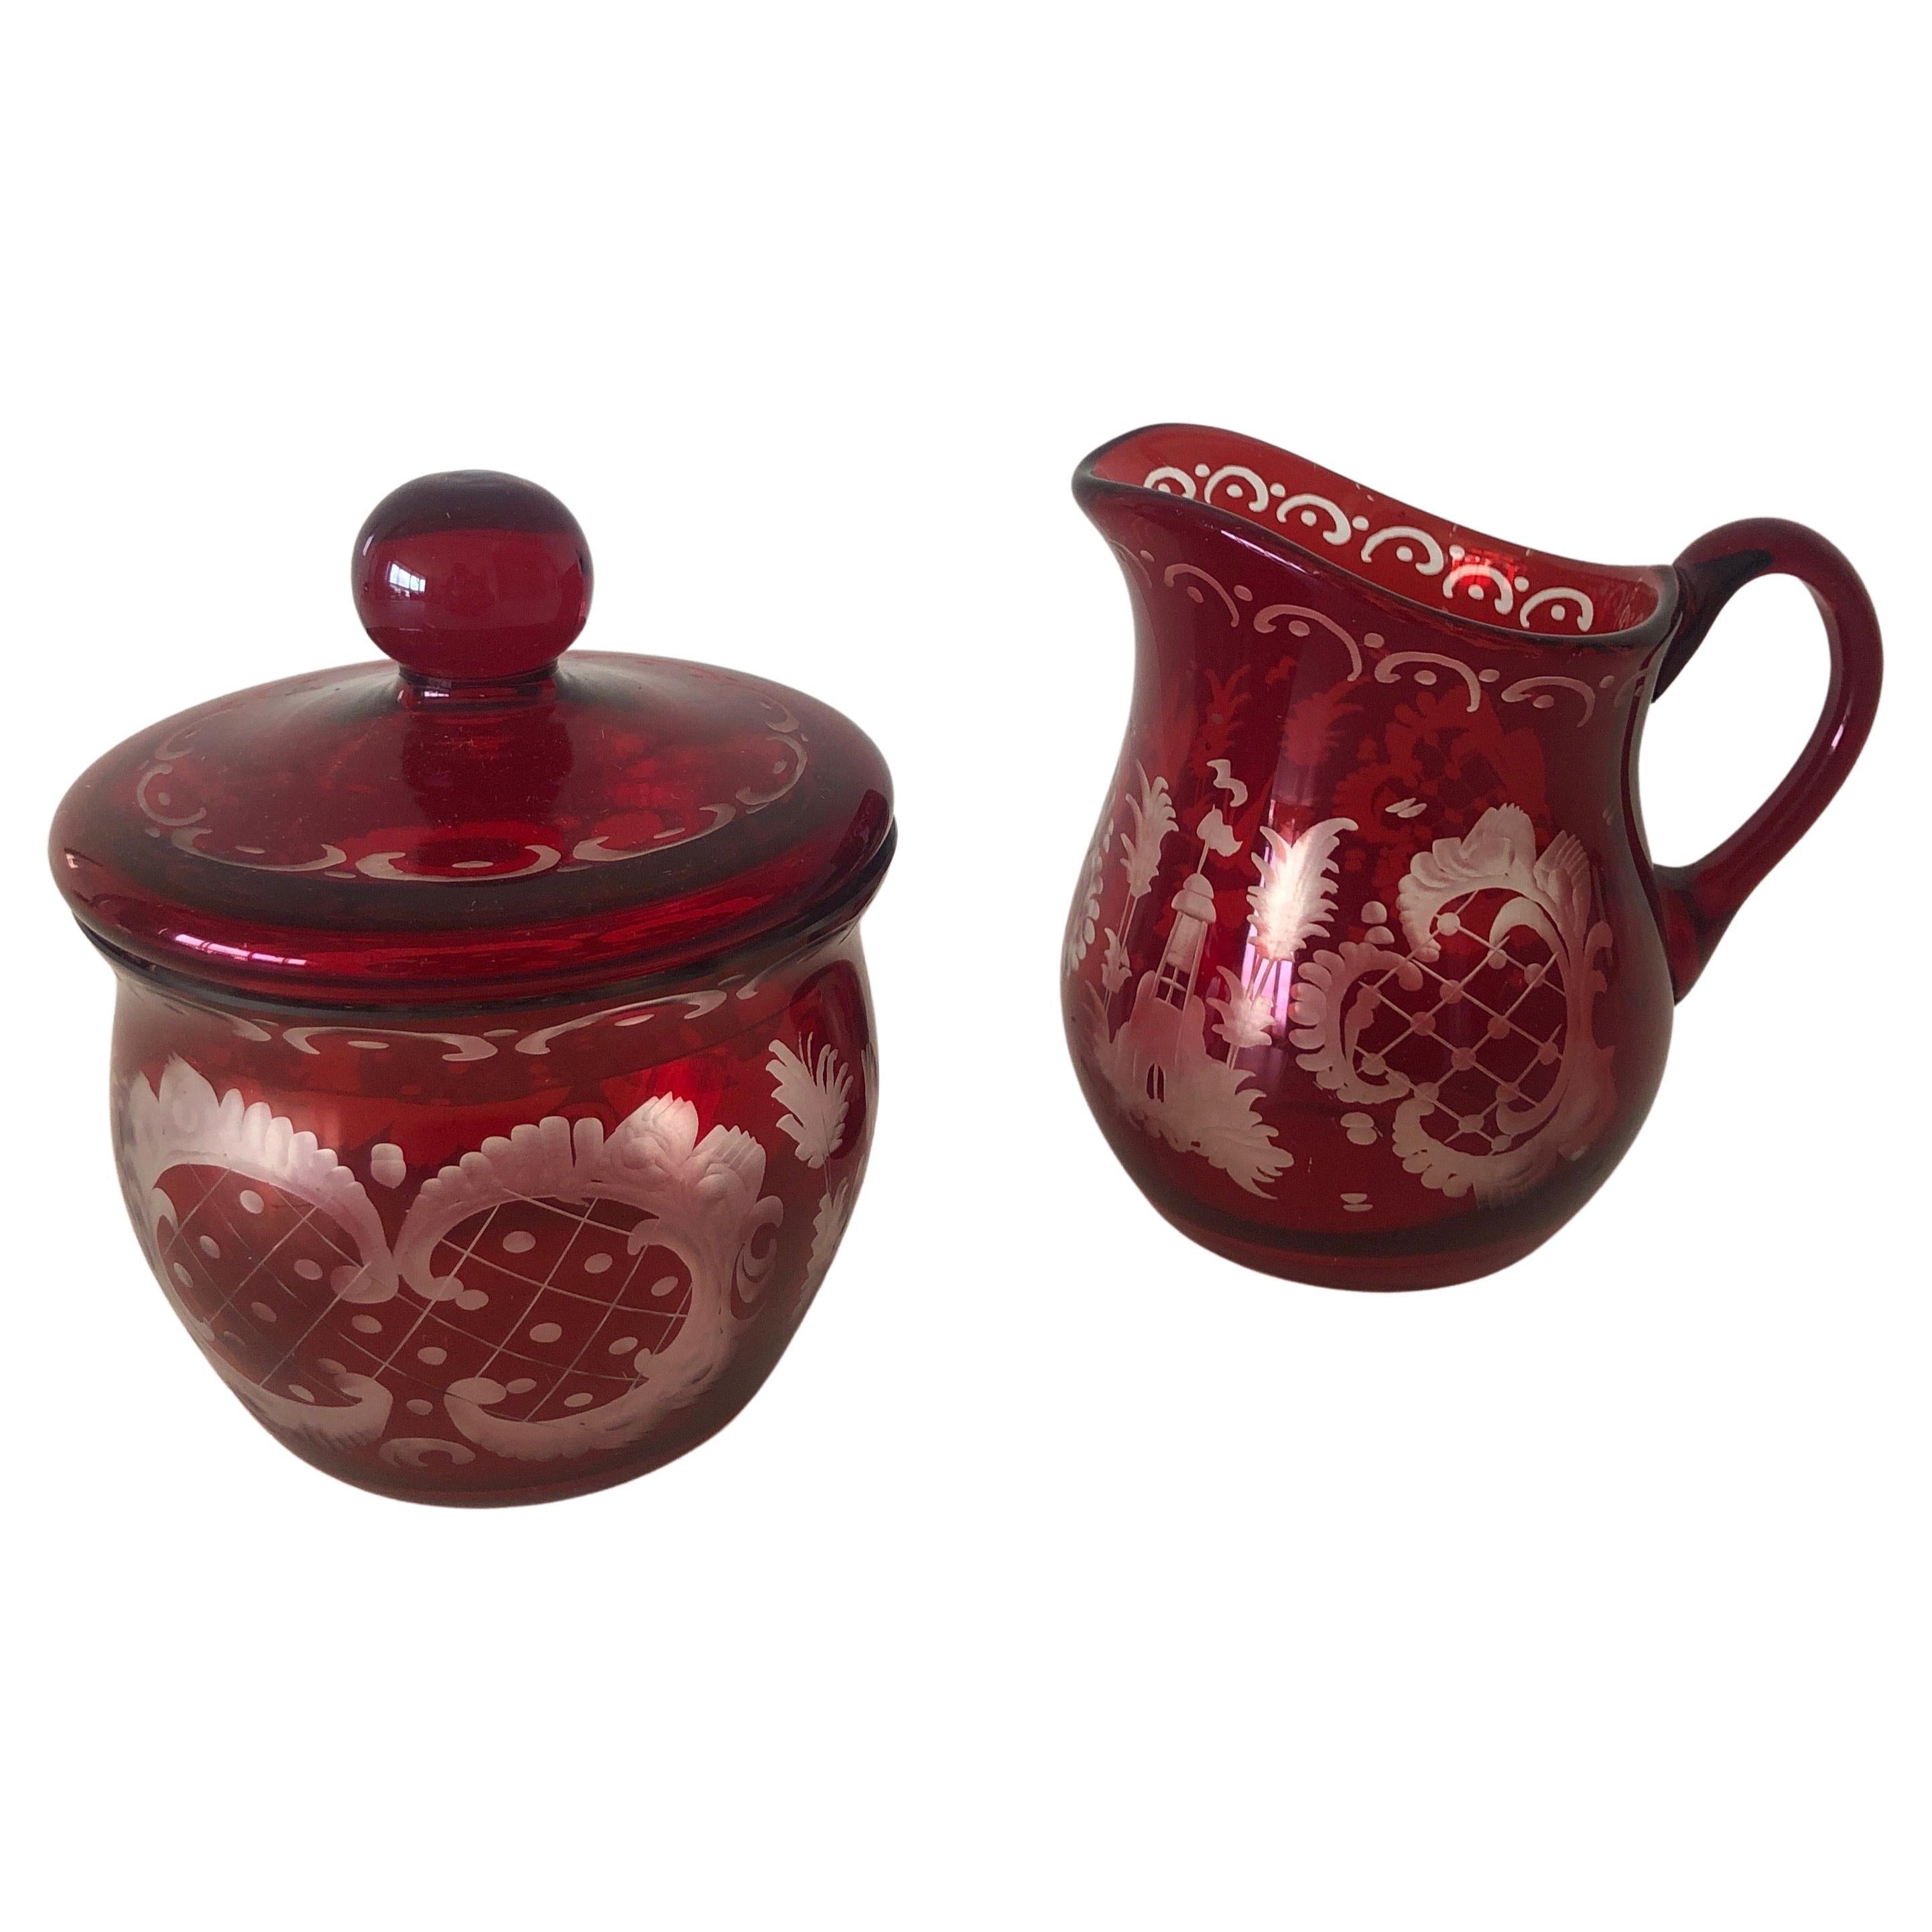 Vintage Red Bohemian Glass Set of Sugar and Creamer Glass with Lid